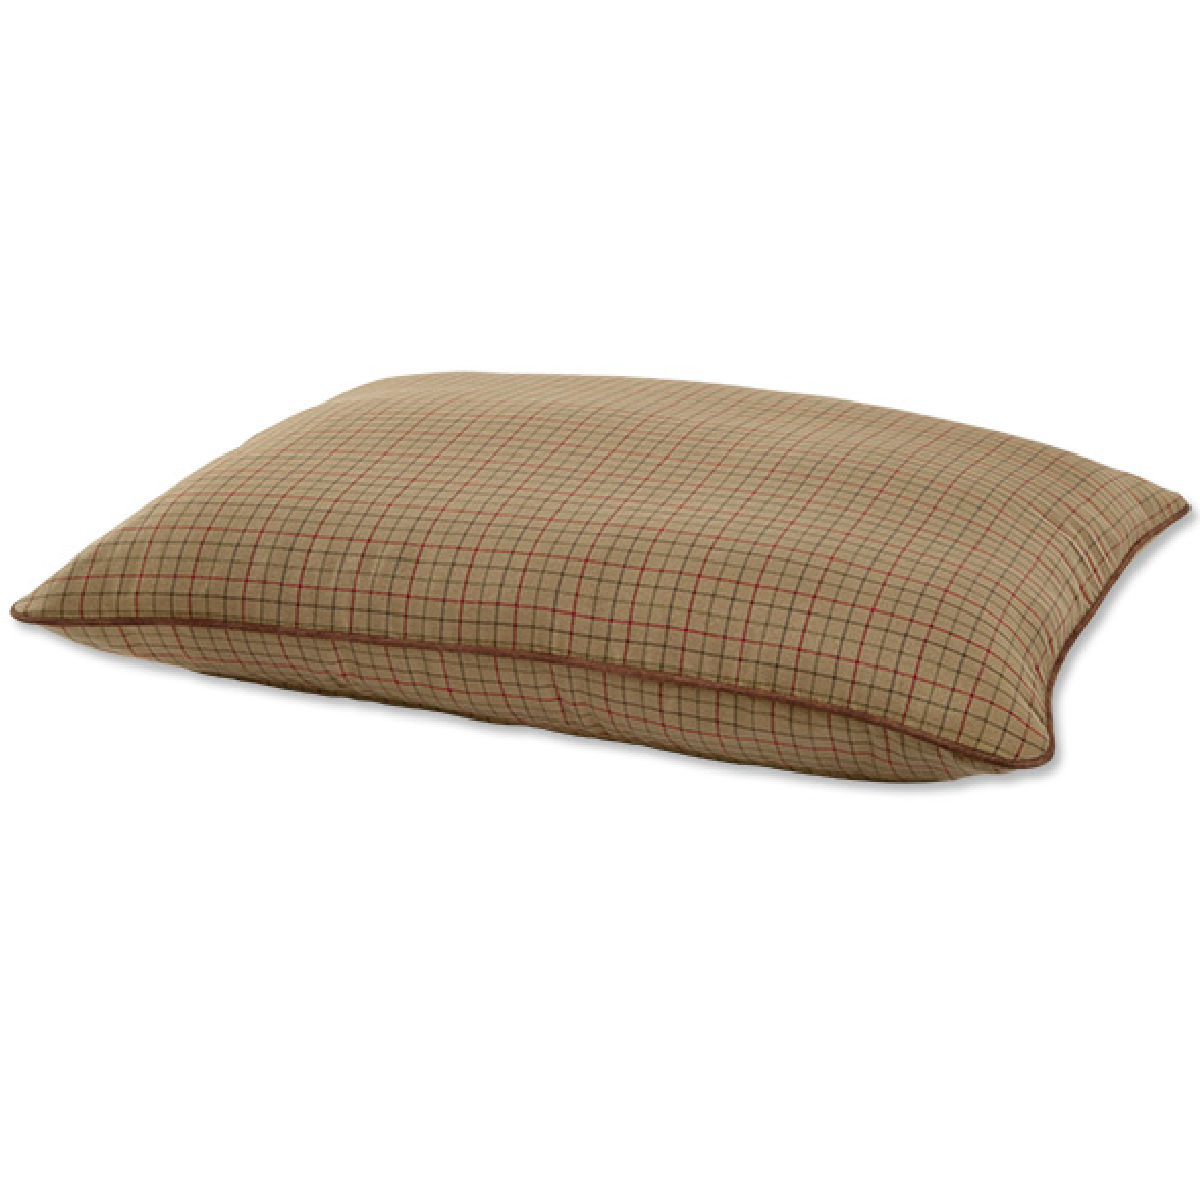 Tattersall Pillow Dog Bed